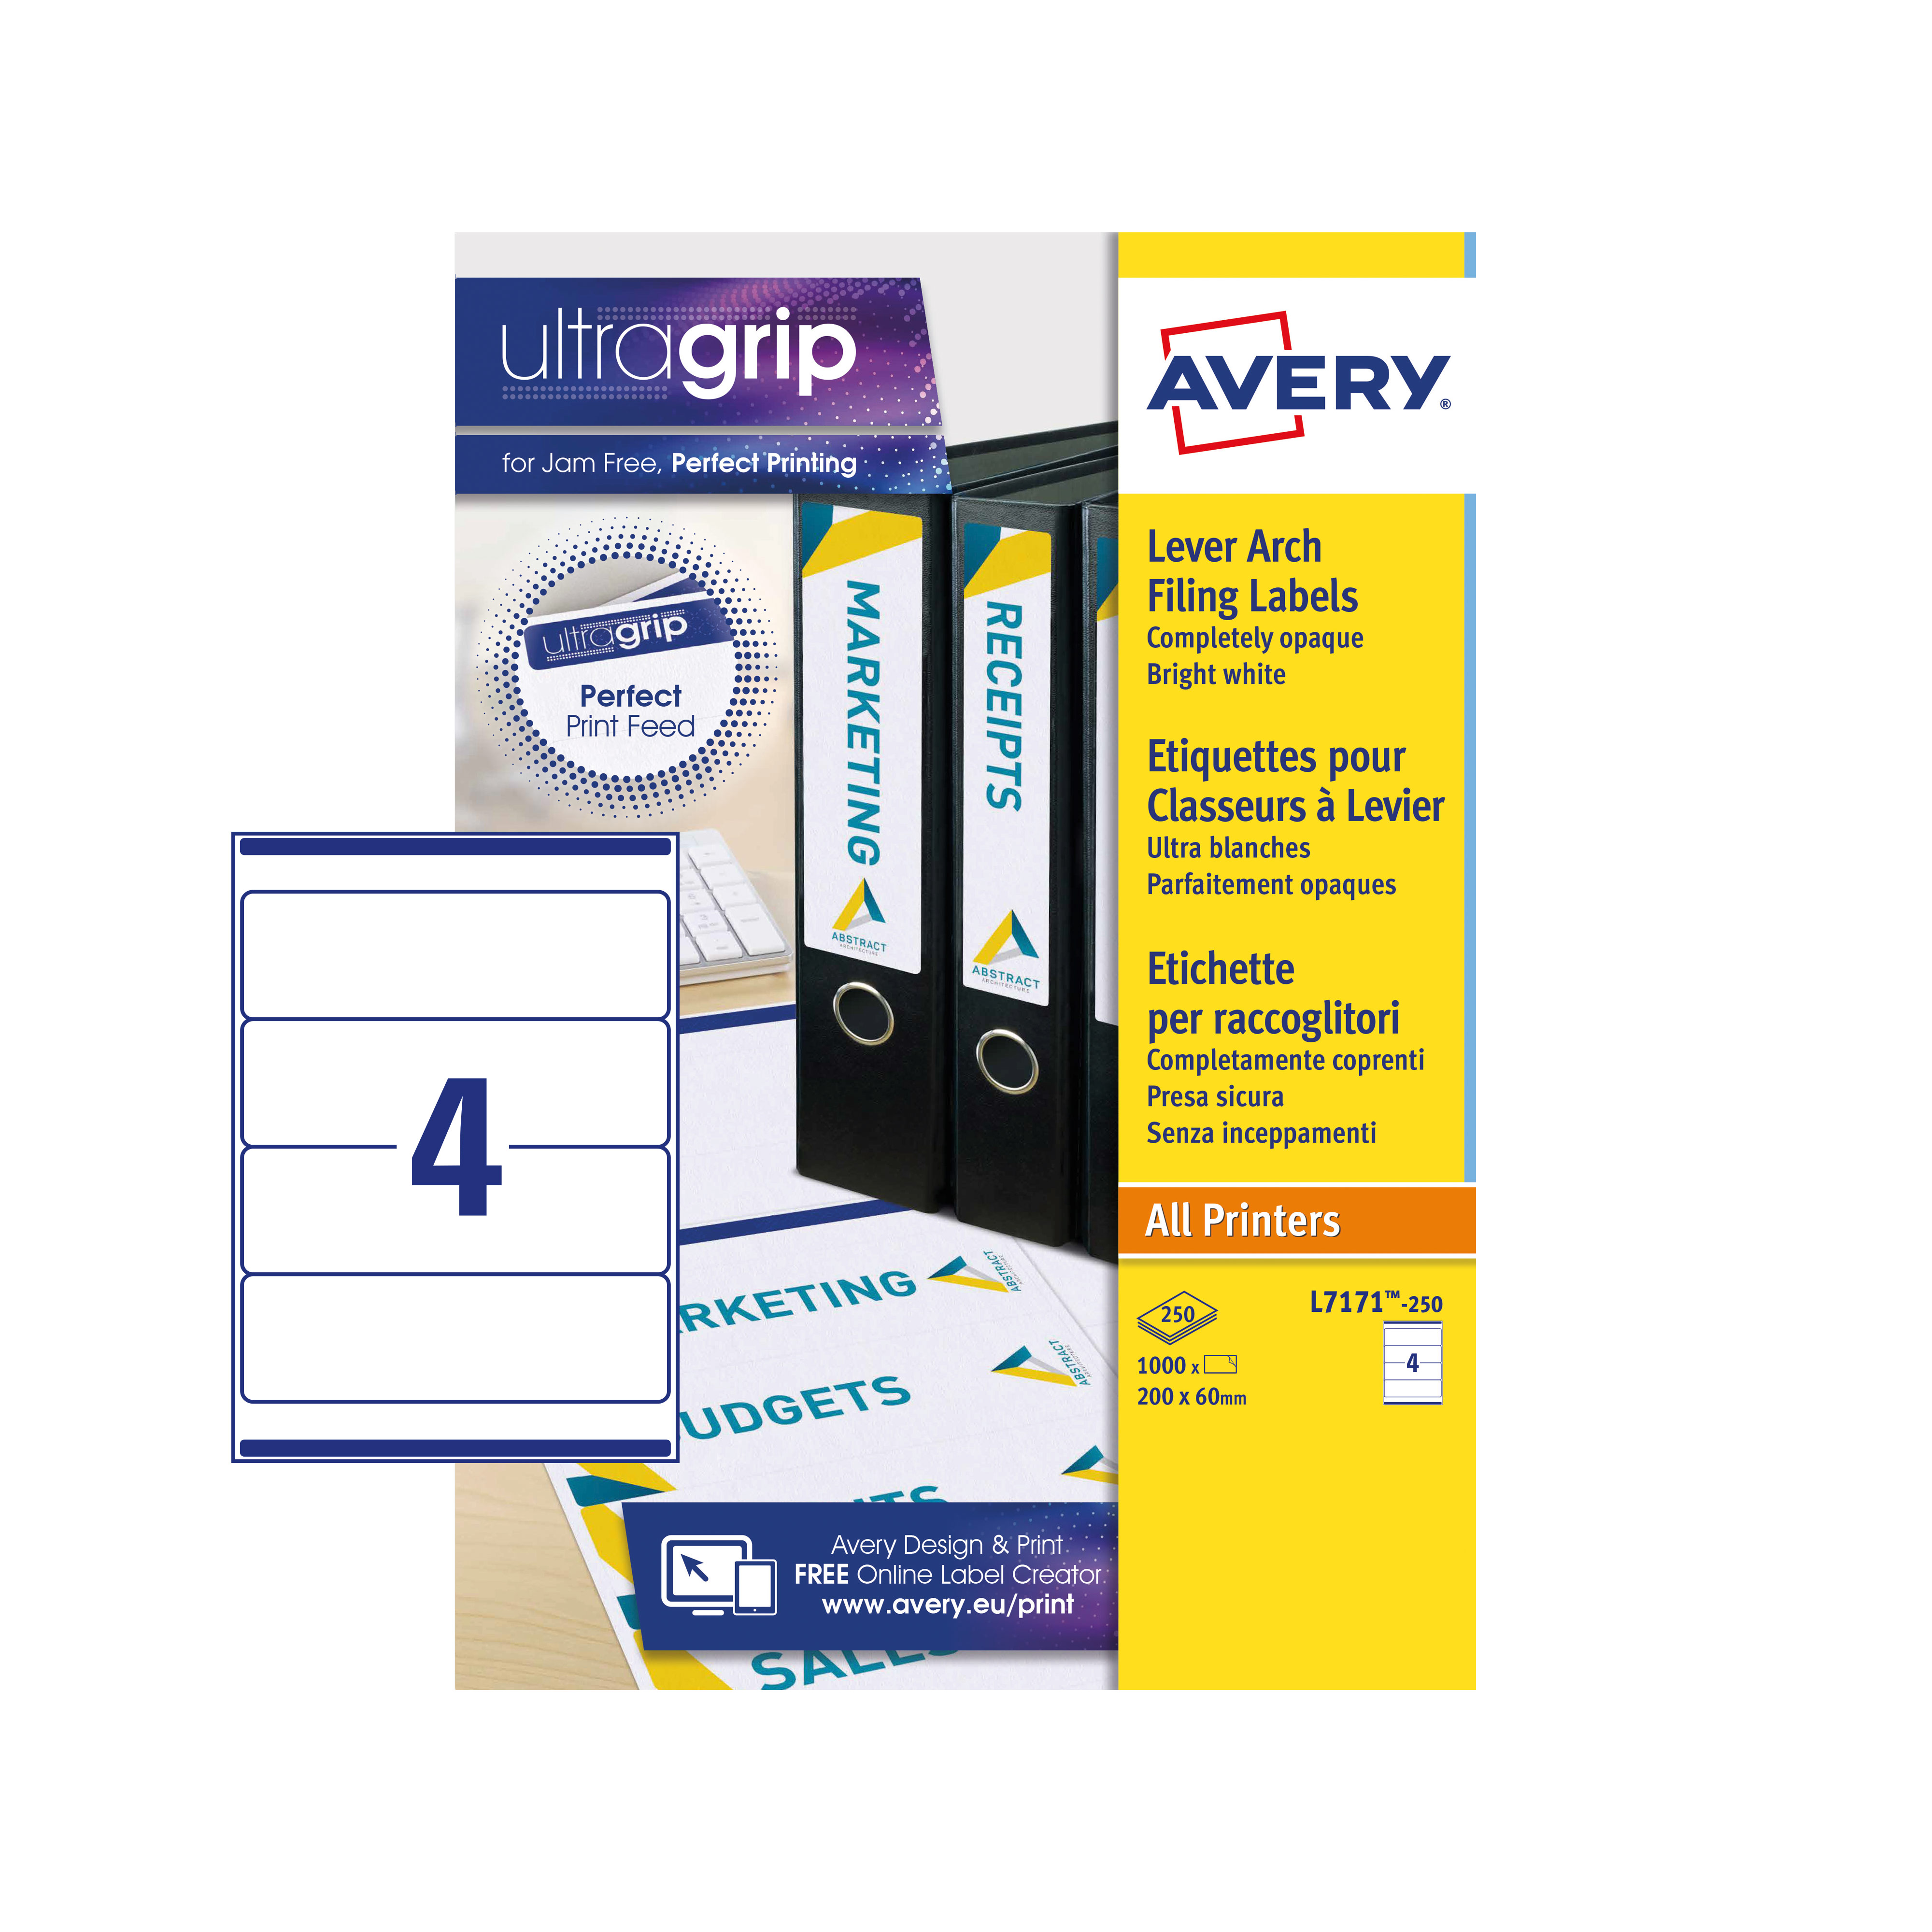 HC22 - White Avery Lever Arch Filing Labels - 22 Labels Regarding Free Lever Arch File Spine Label Template